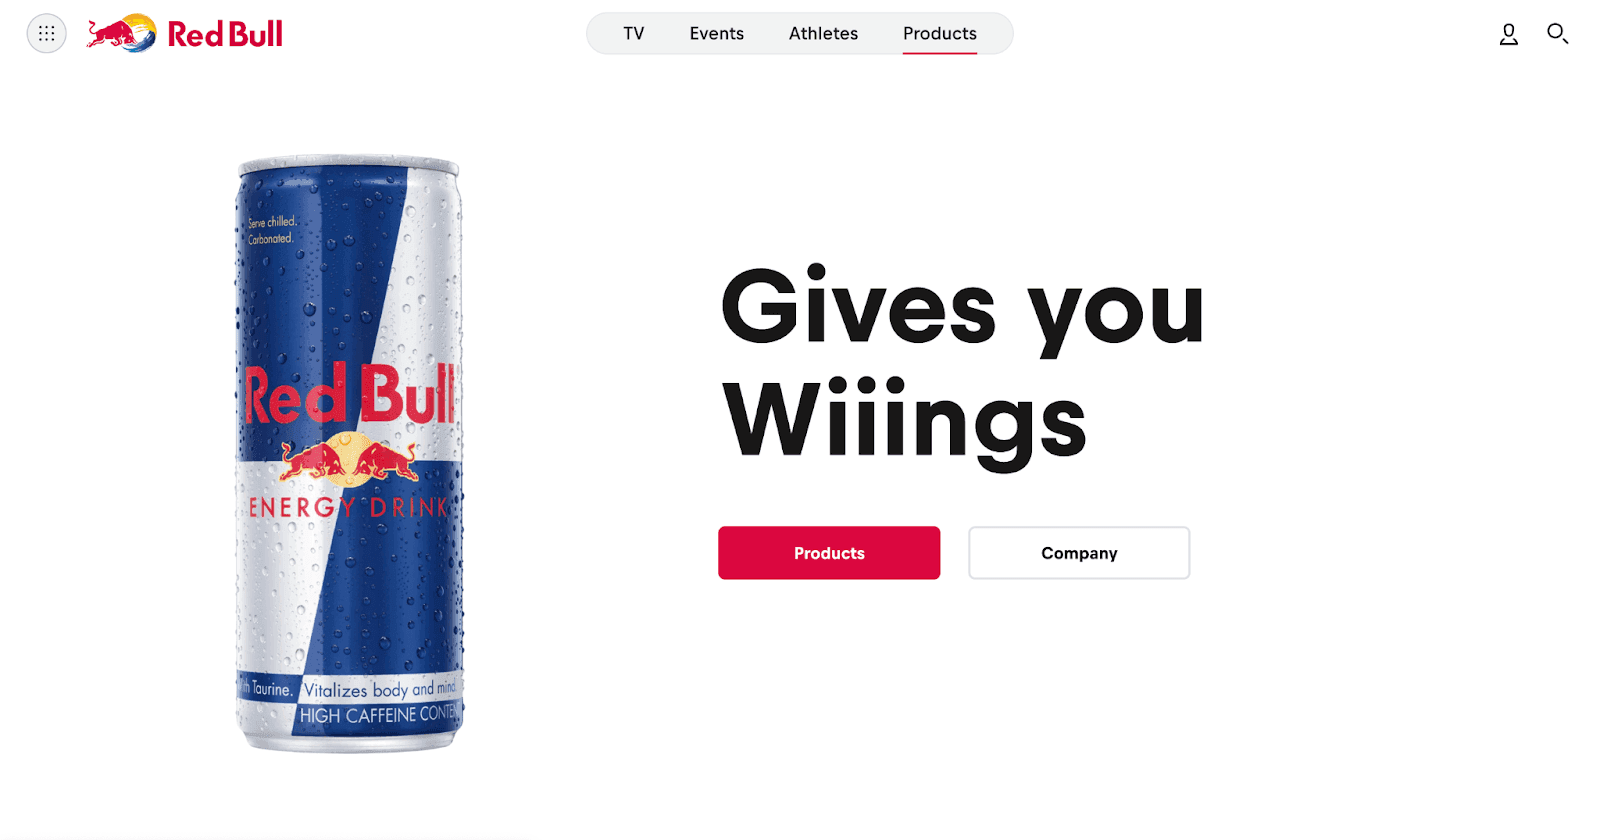 Red Bull's product landing page on their website